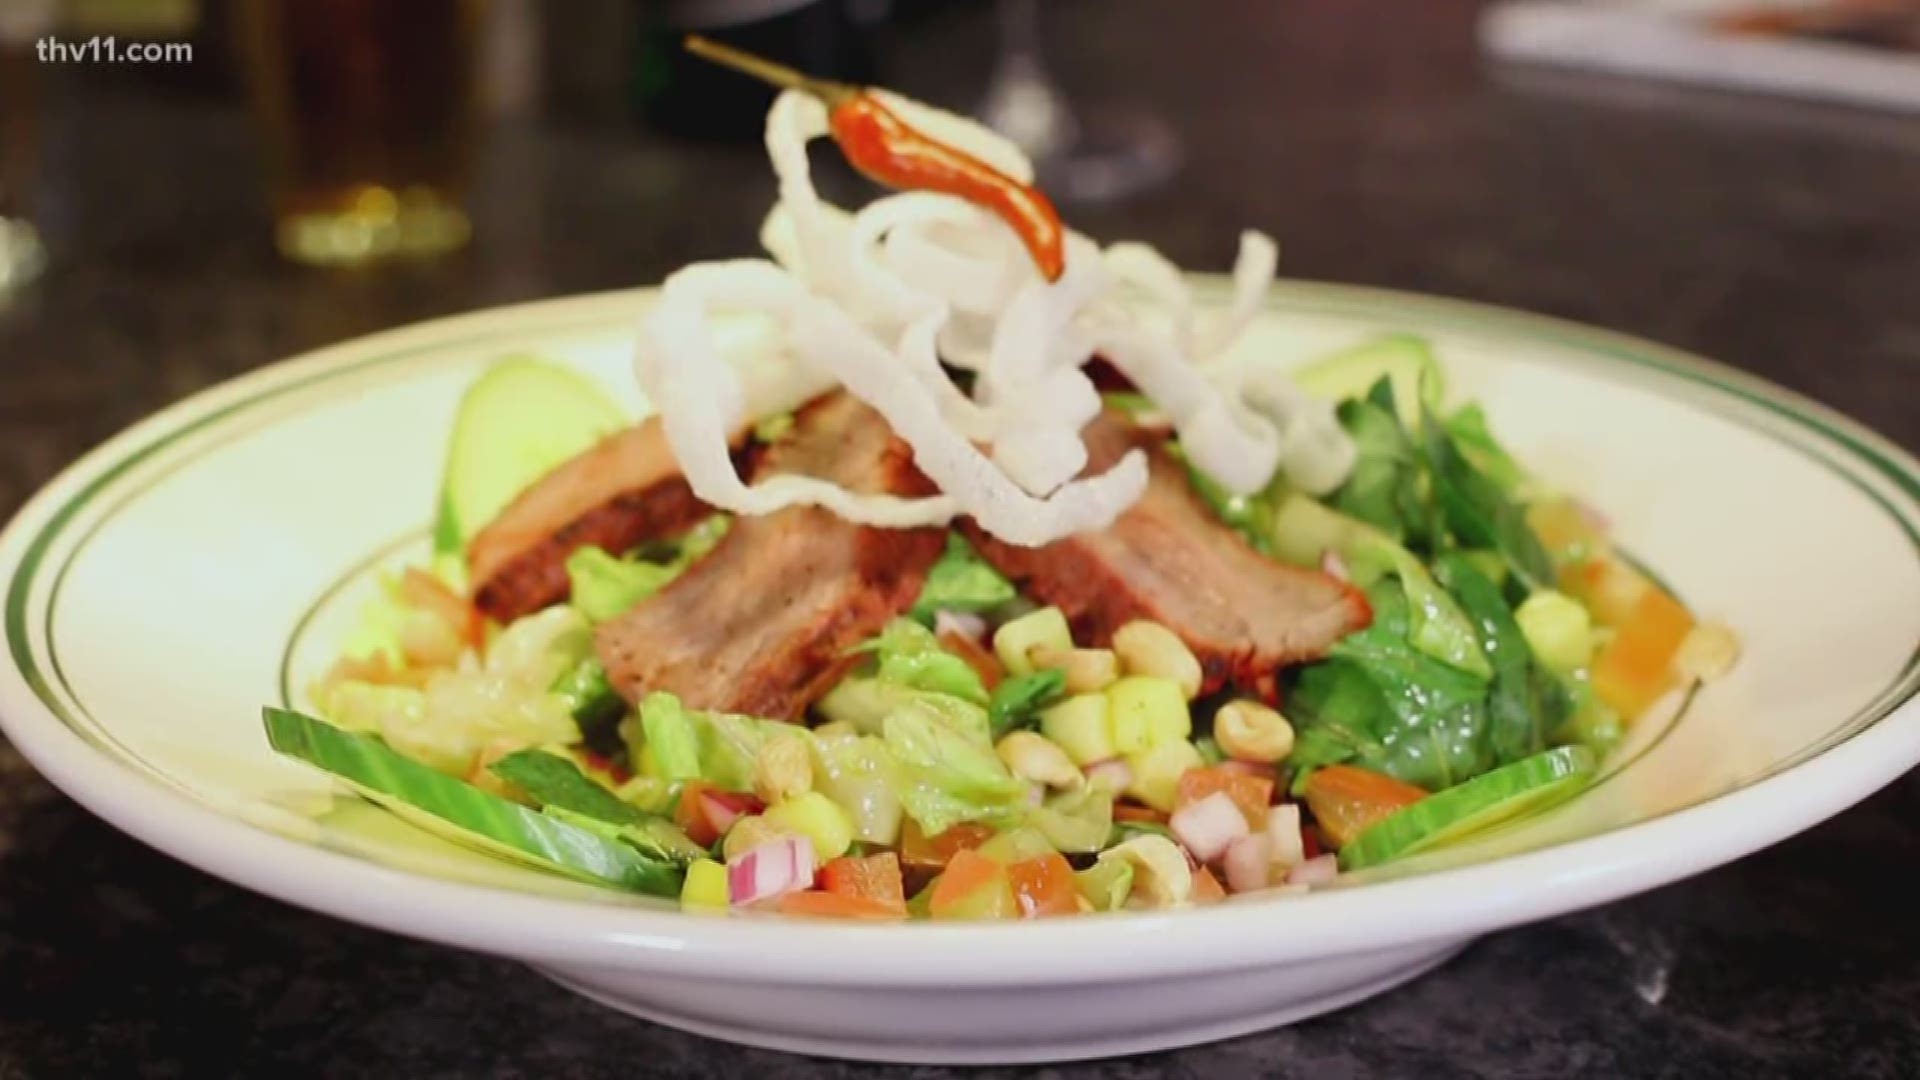 Atlas Bar is serving up great food and drinks including a delicious Thai Beef Salad!